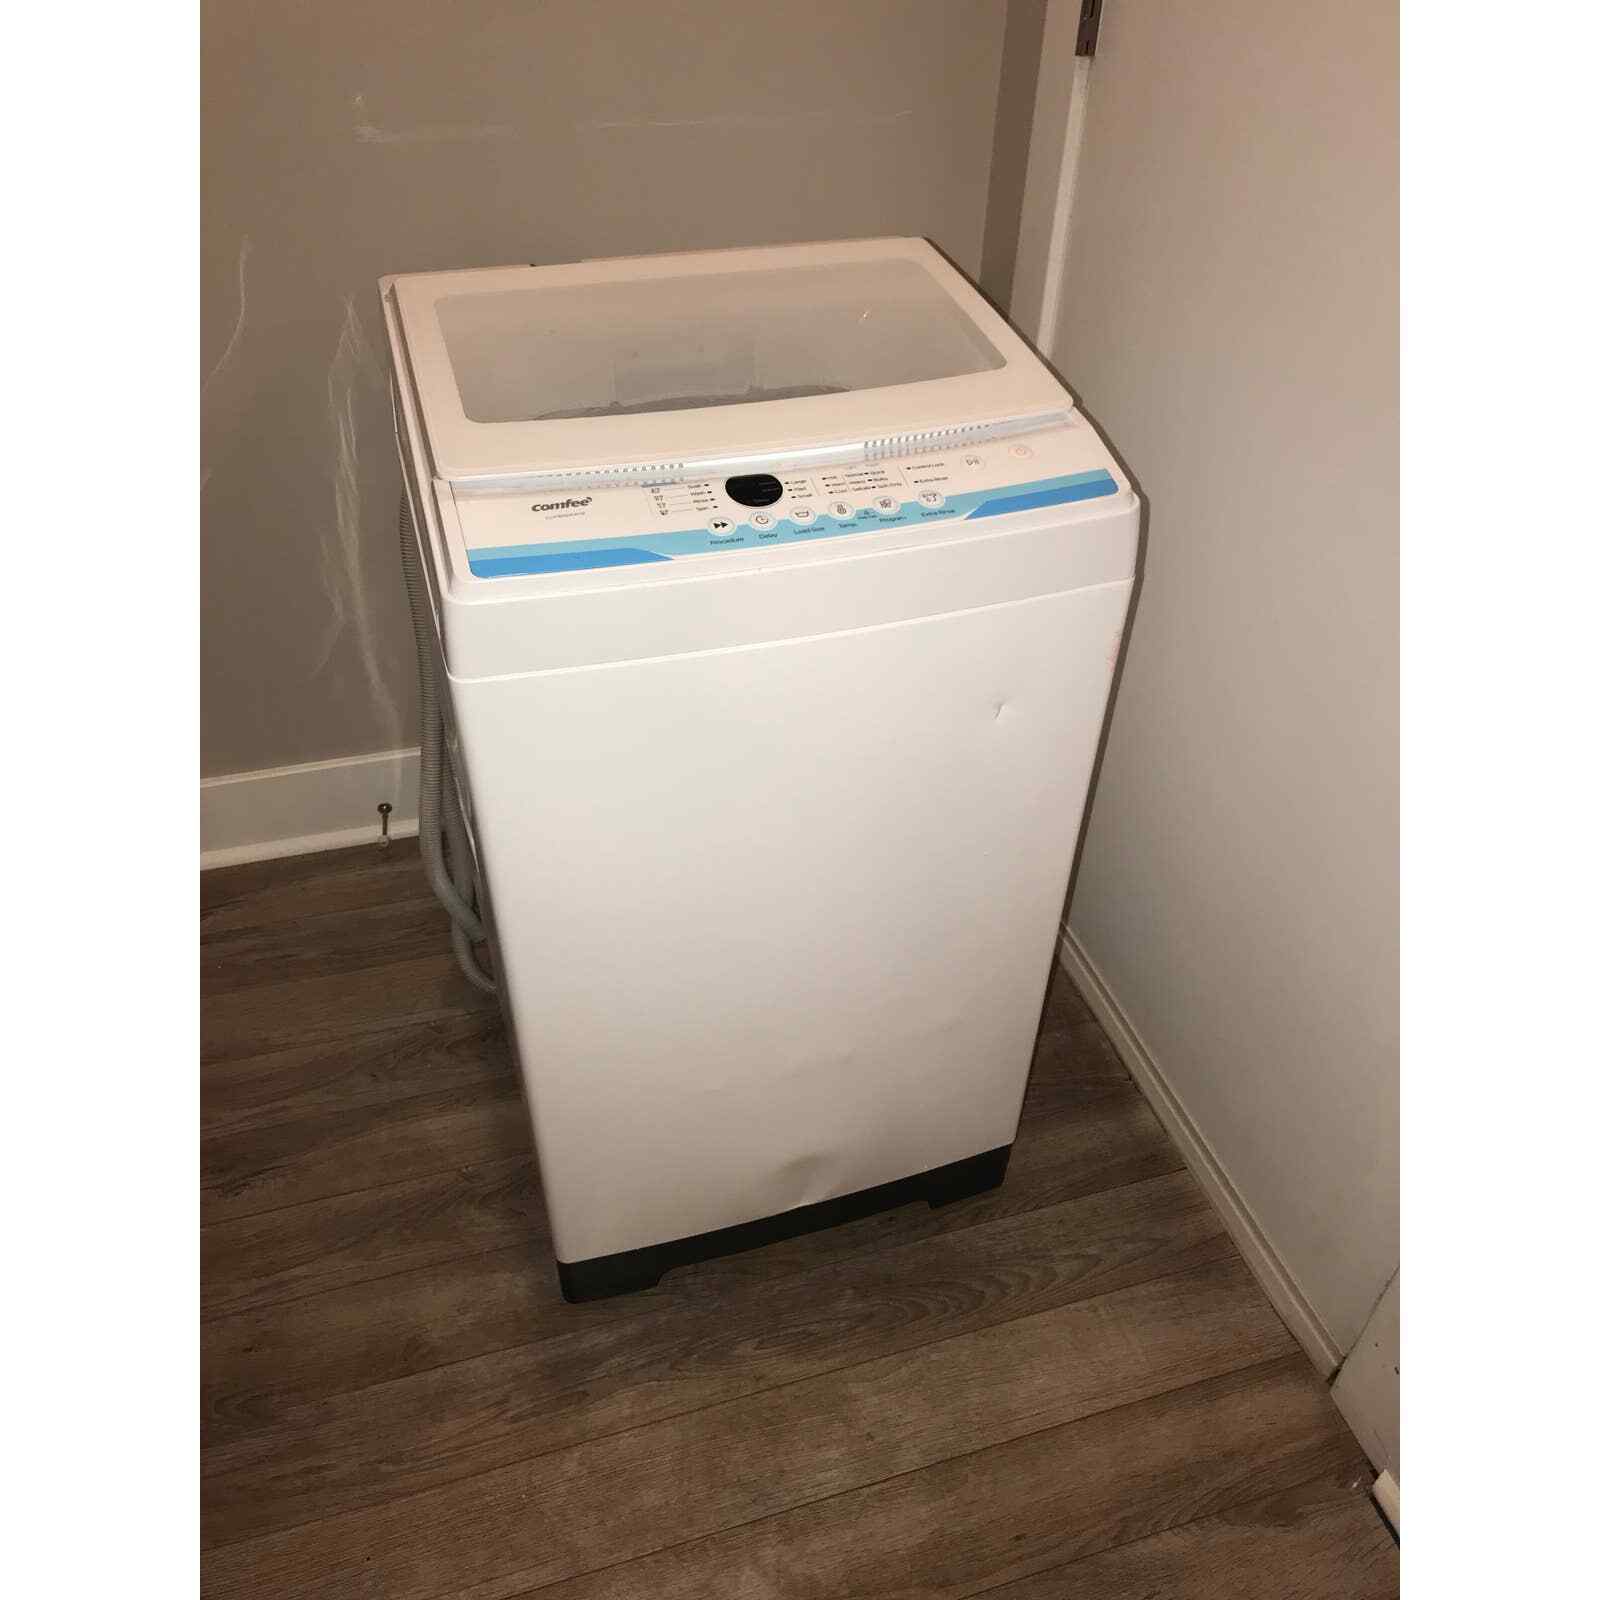 Comfee’ 1.6 Cu.ft Portable Washing Machine, 11lbs Capacity Fully Automatic